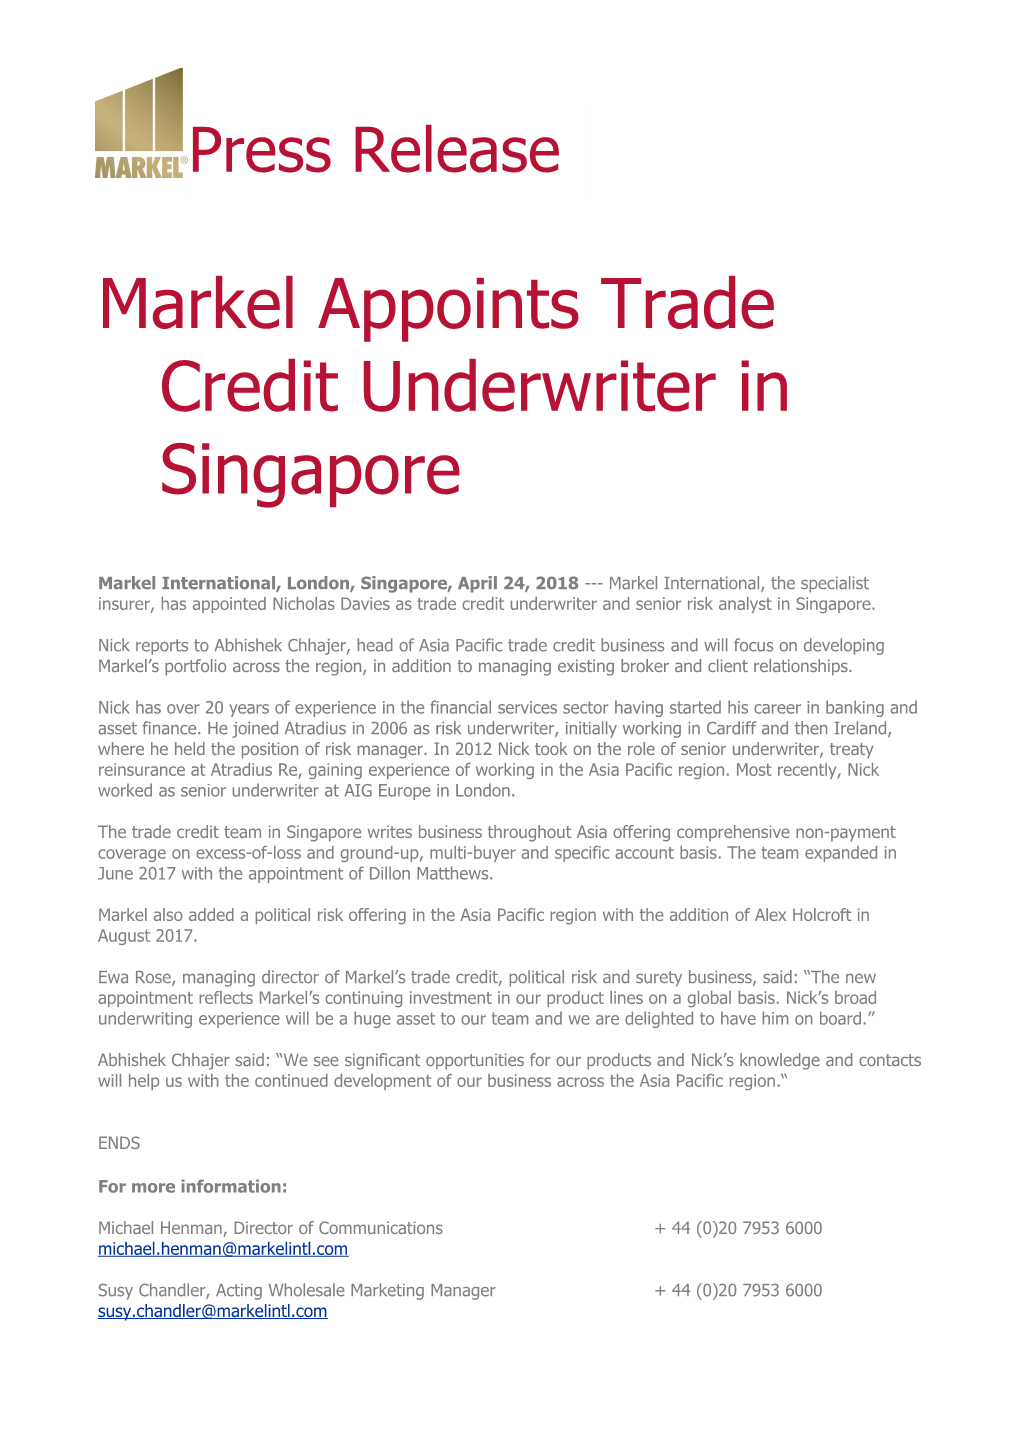 Markel Appoints Trade Credit Underwriter in Singapore